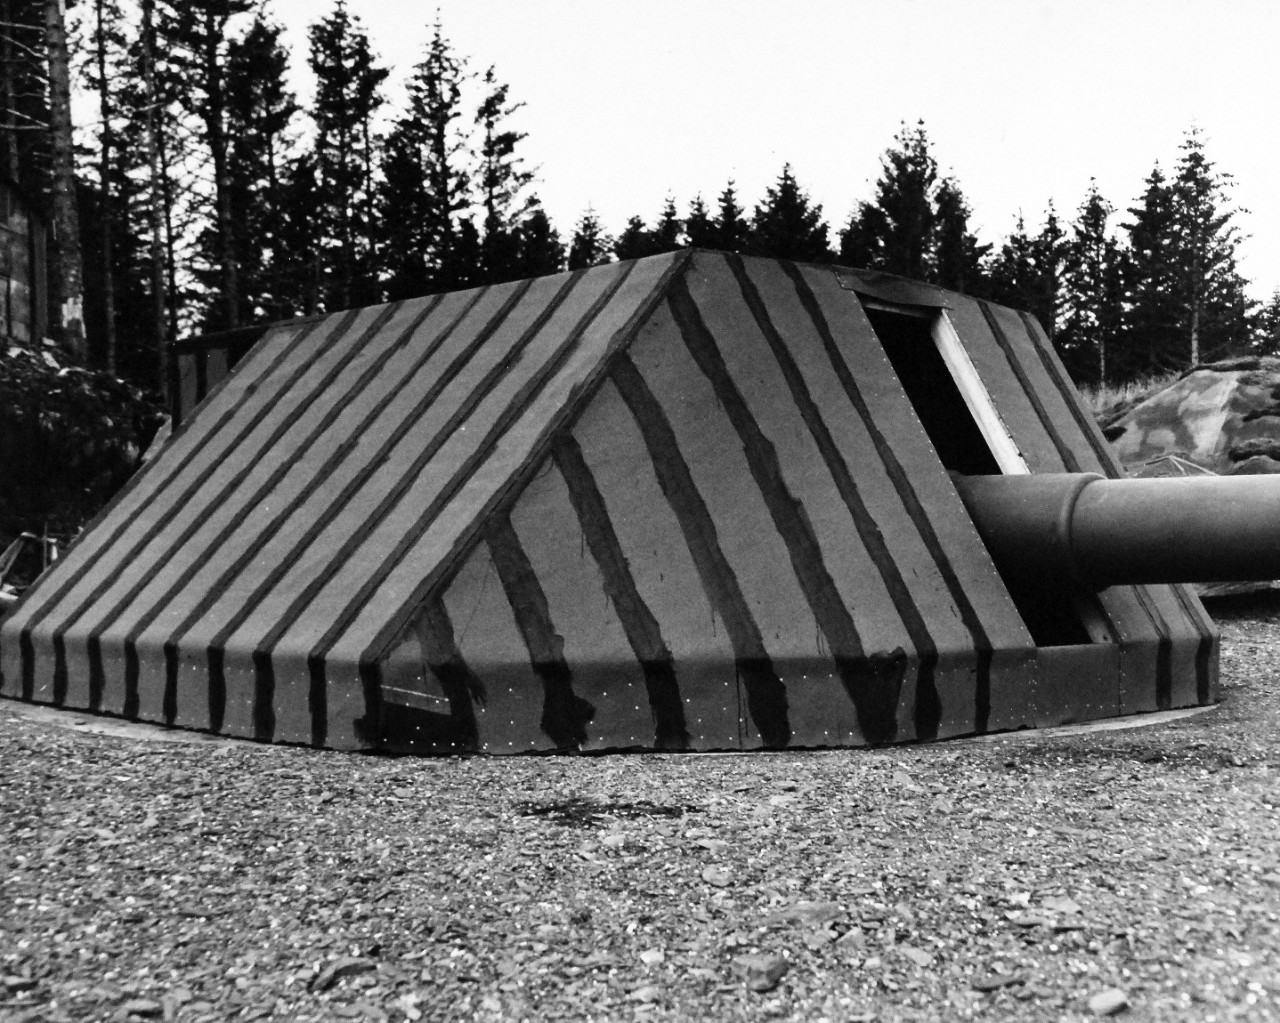 80-G-279827:   Miller Point, Kodiak, Alaska, 1945.    Cover for 6” gun.   Photographed by PhoM1/R.K. Thomas, August 6, 1945.  U.S. Navy Photograph now in the collections of the National Archives.  (2016/01/19).